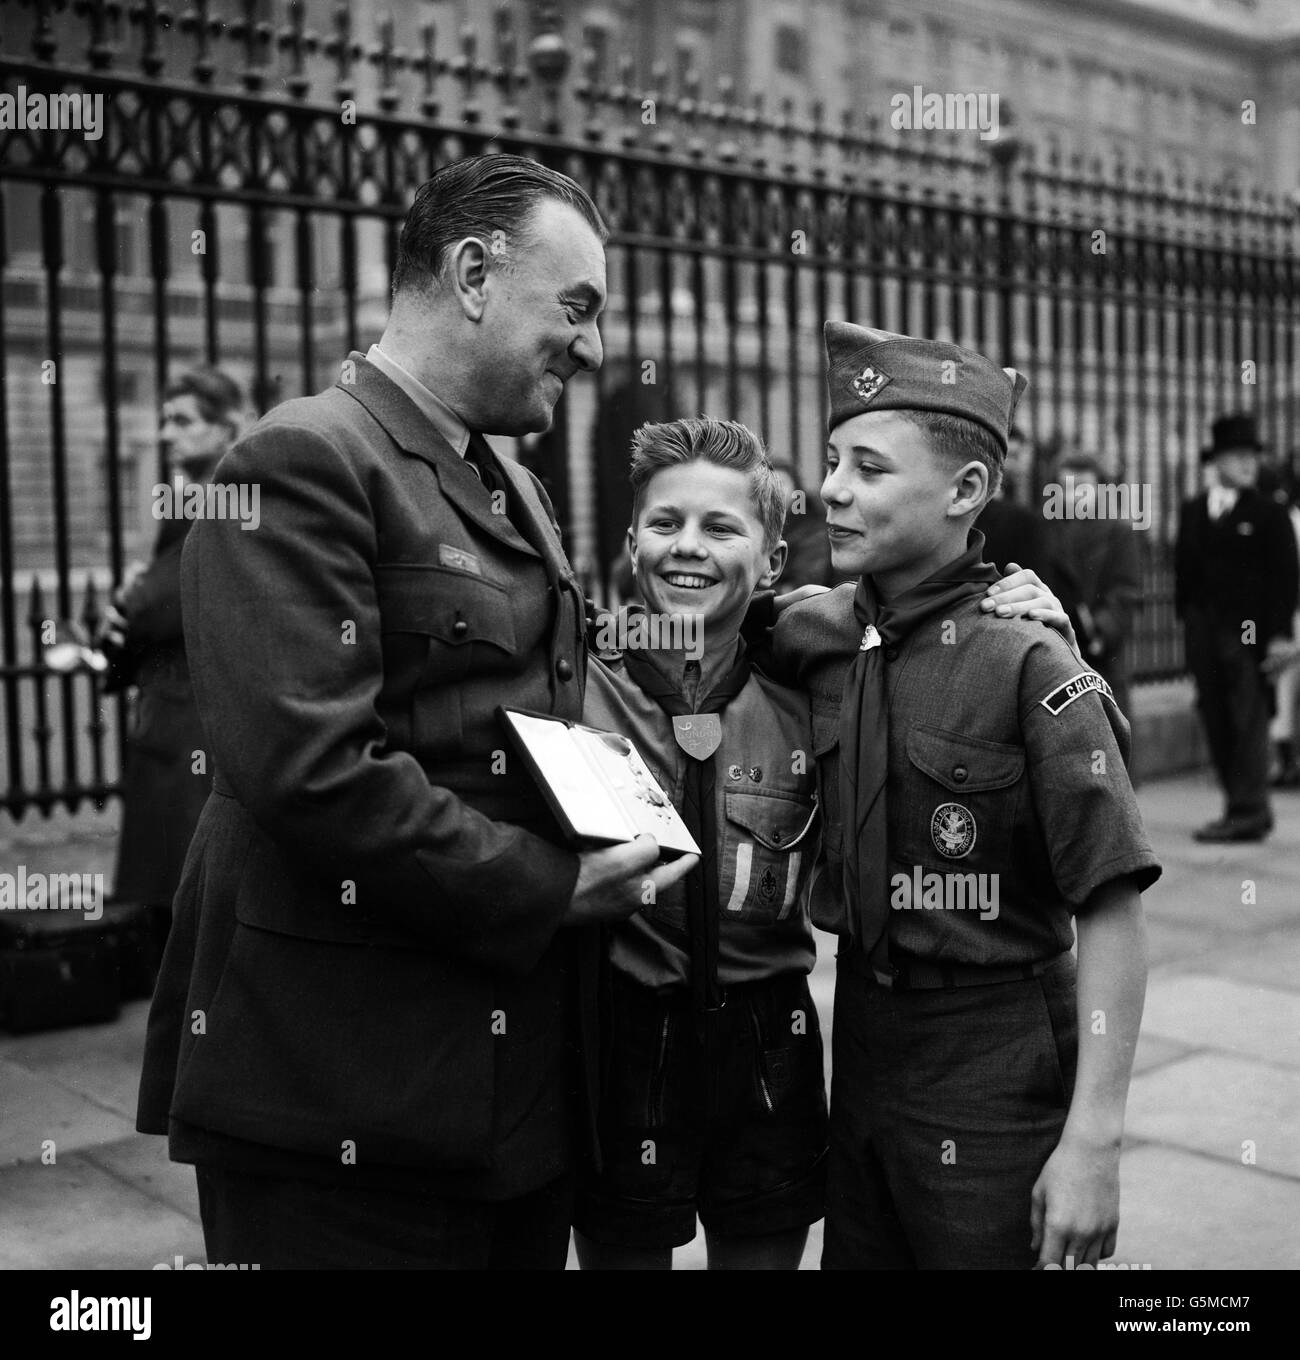 Ralph Reader, whose 'Gang Show' was presented at the Royal Variety Performance leaves Buckingham Palace after taking part in another Royal occasion. * ... He had just received the CBE (Commander of the British Empire Order) from the Queen at an investiture and he is seen showing the insignia to Scouts Mickie Hannam (left) and John Robinson. Stock Photo